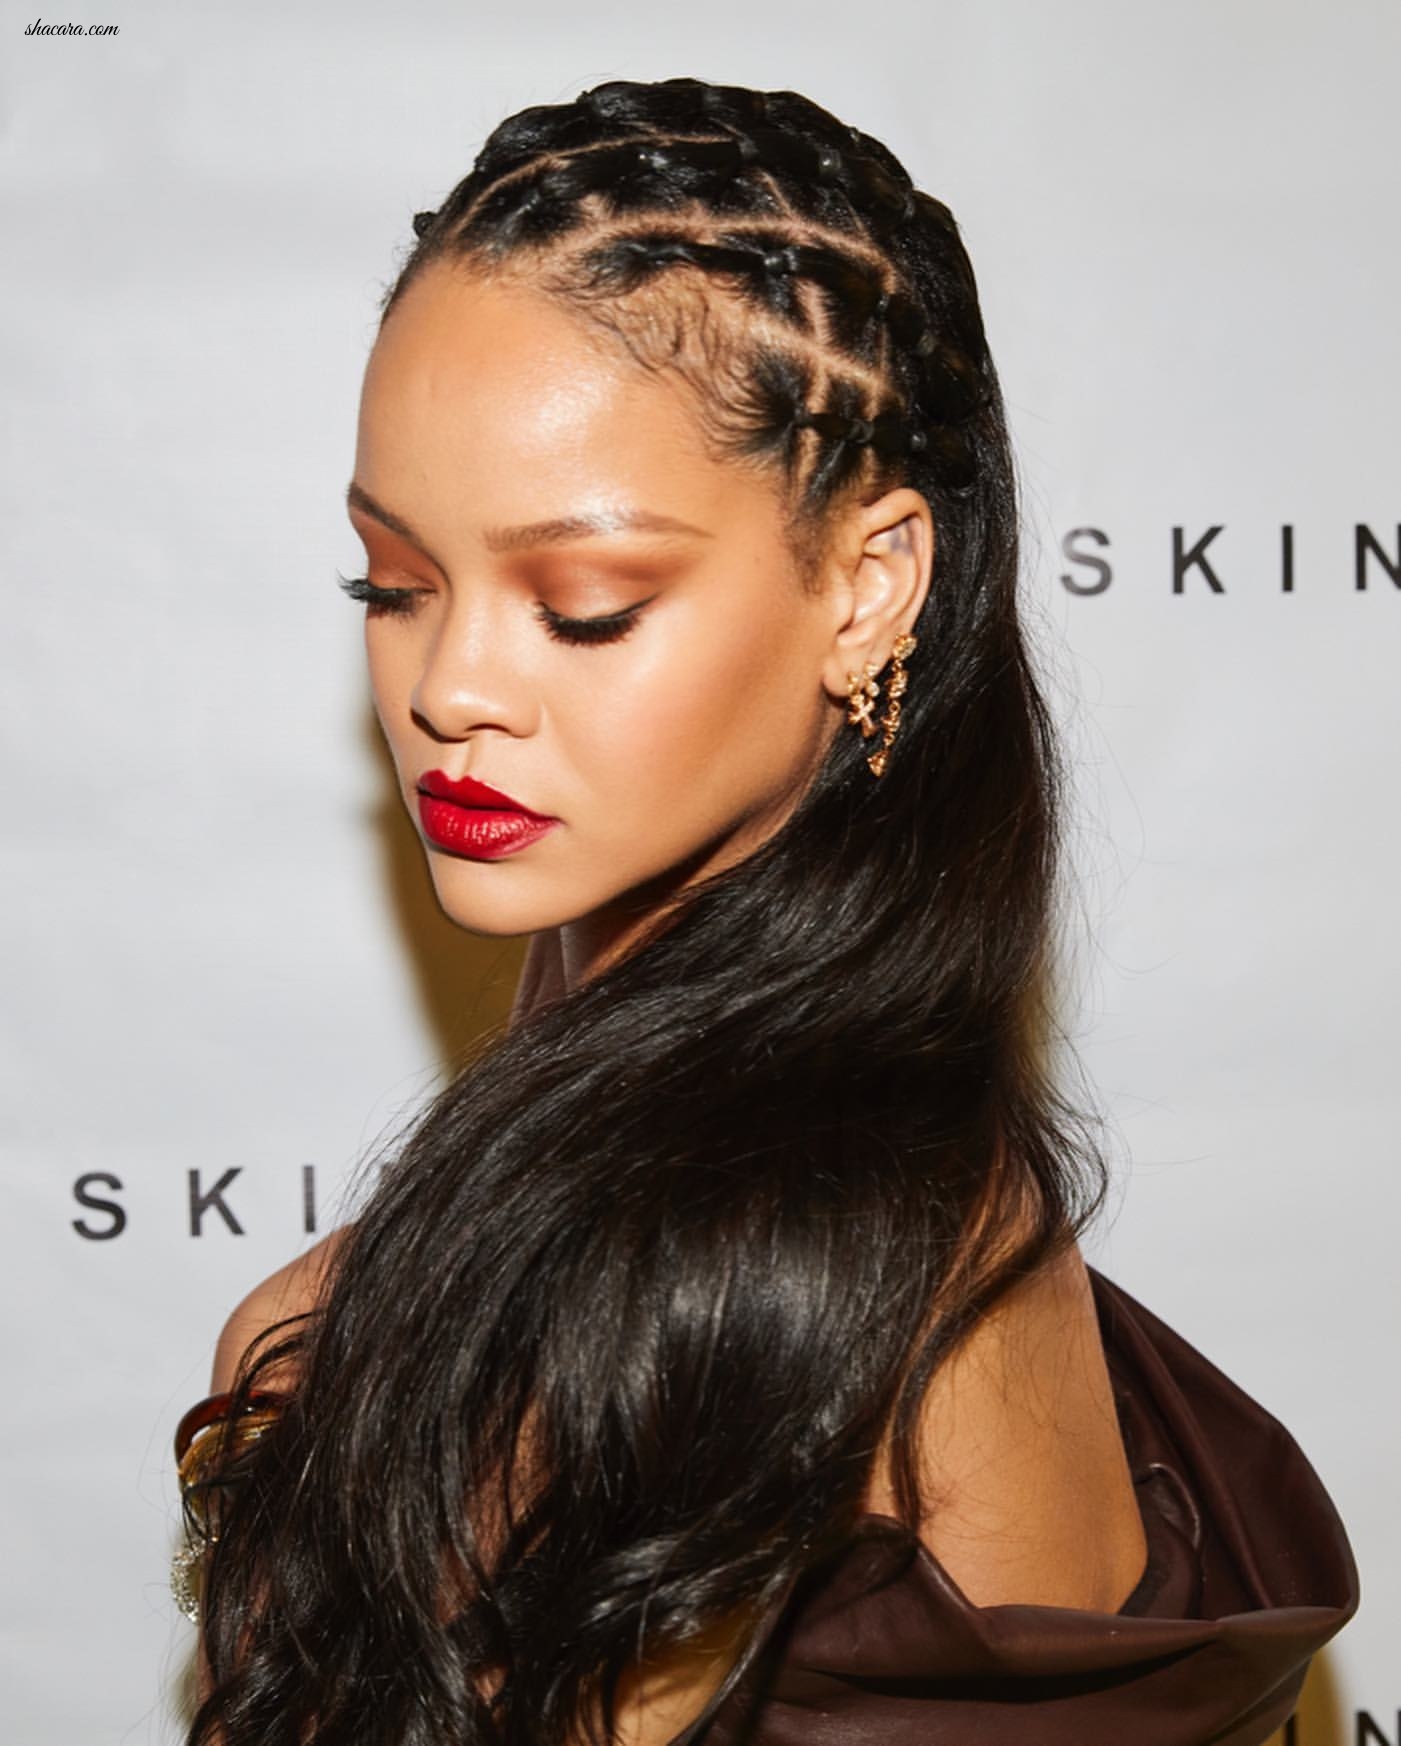 Rihanna Looked Absolutely Stunning At The Virtual Launch Of Fenty Skin